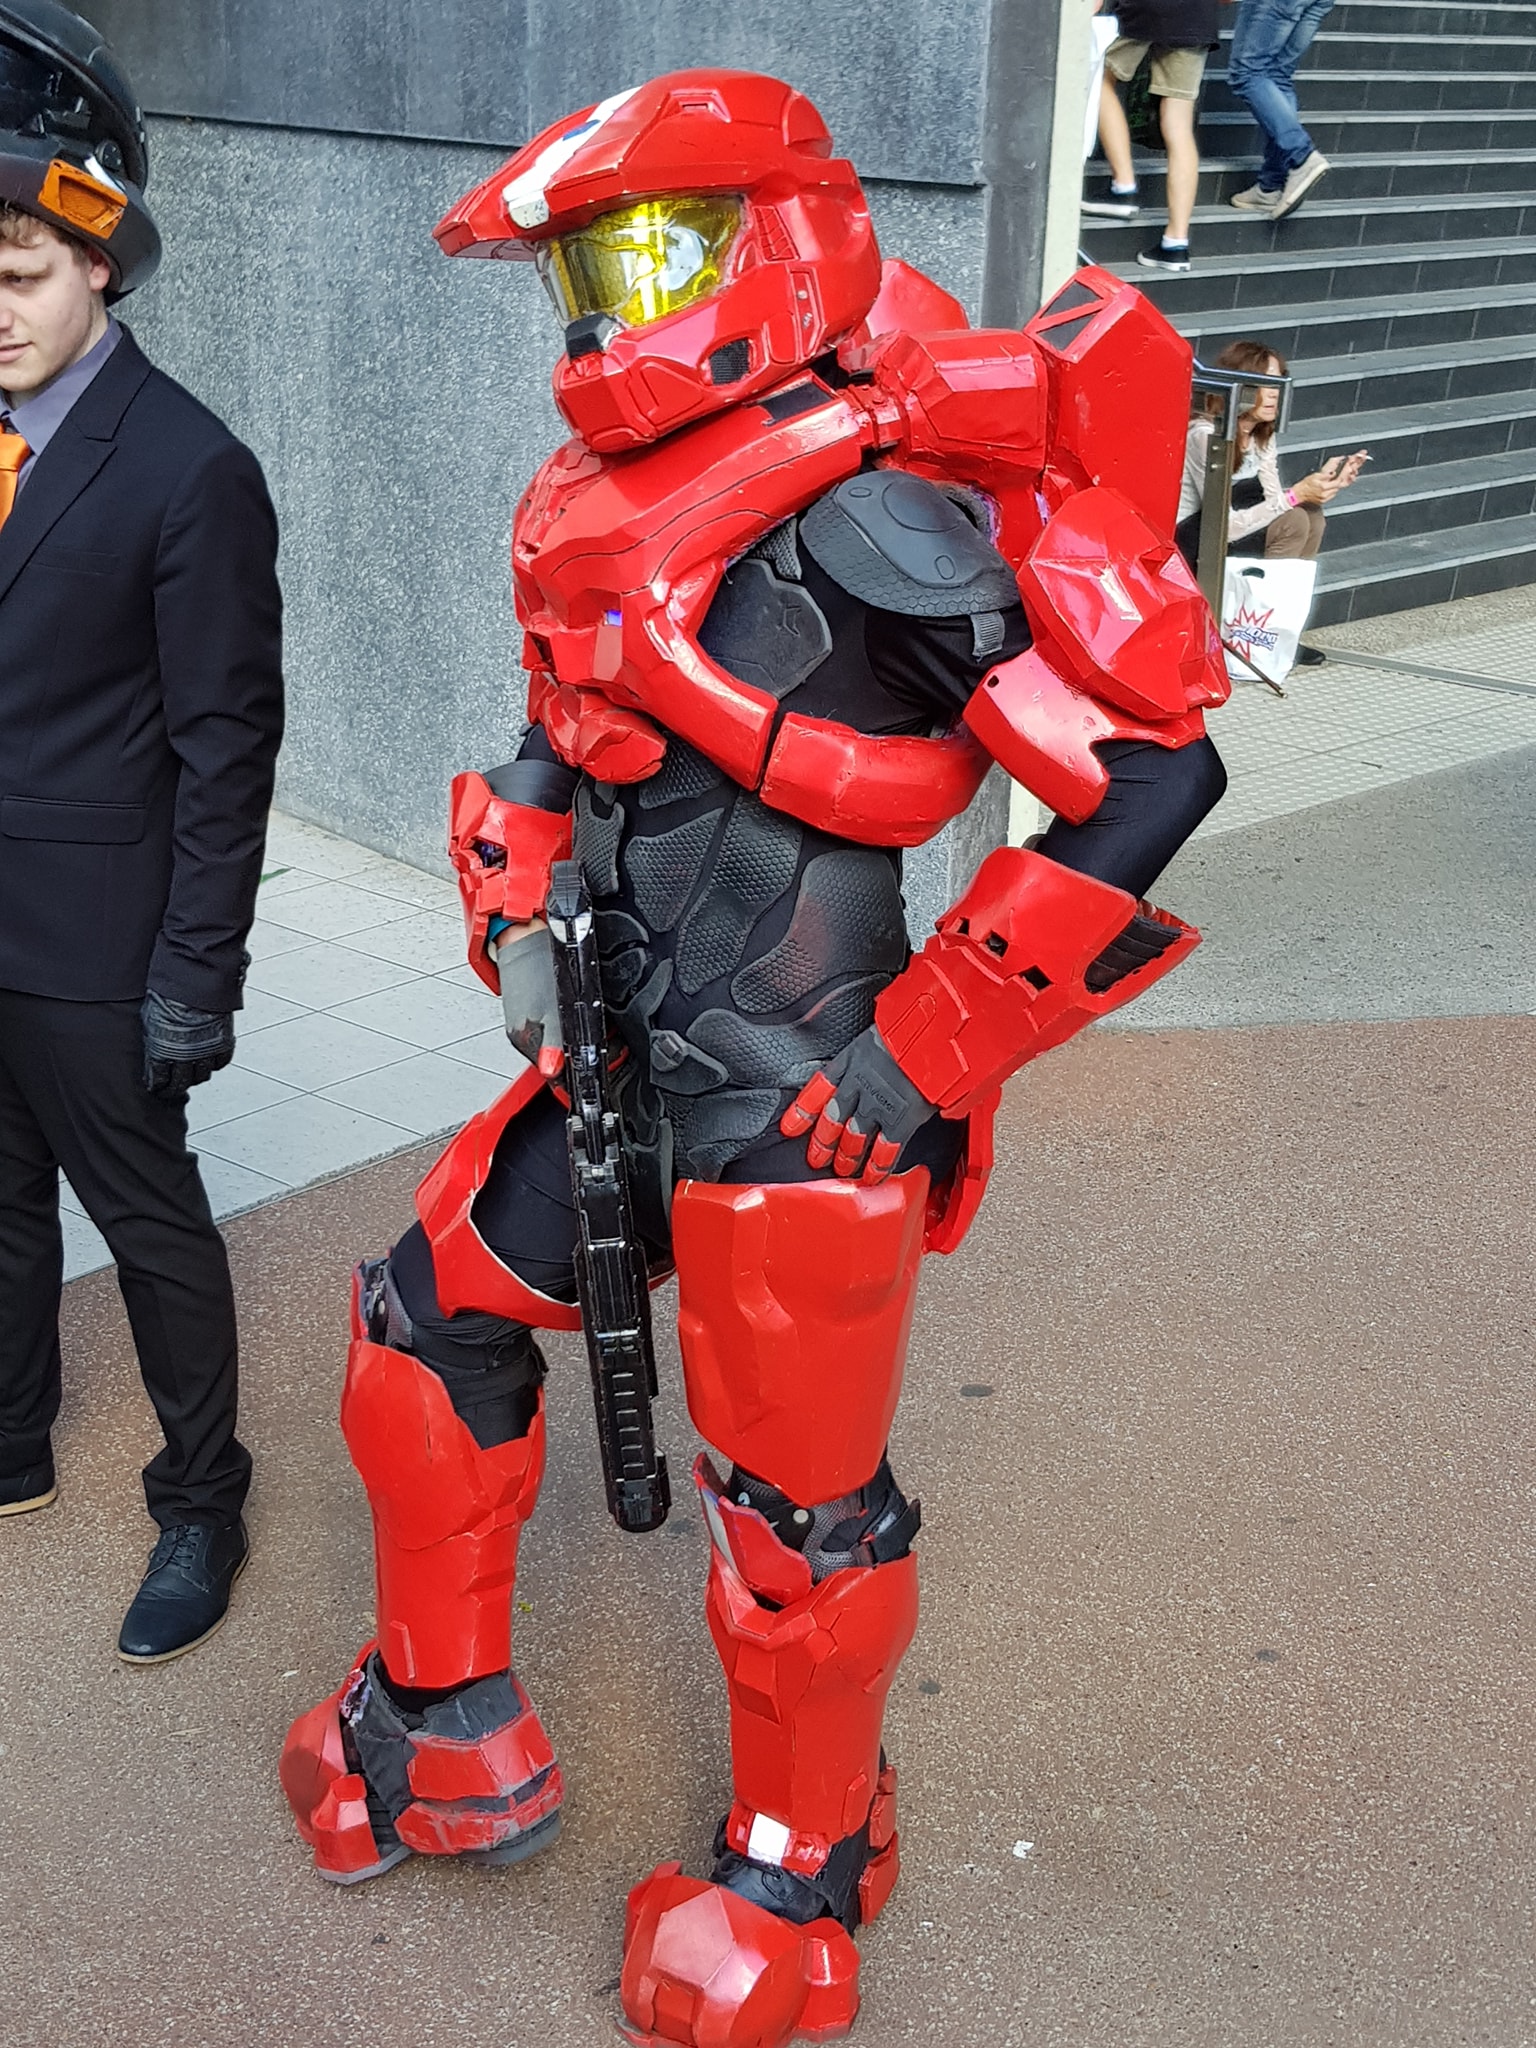 Weird flex but okay | Halo Costume and Prop Maker Community - 405th